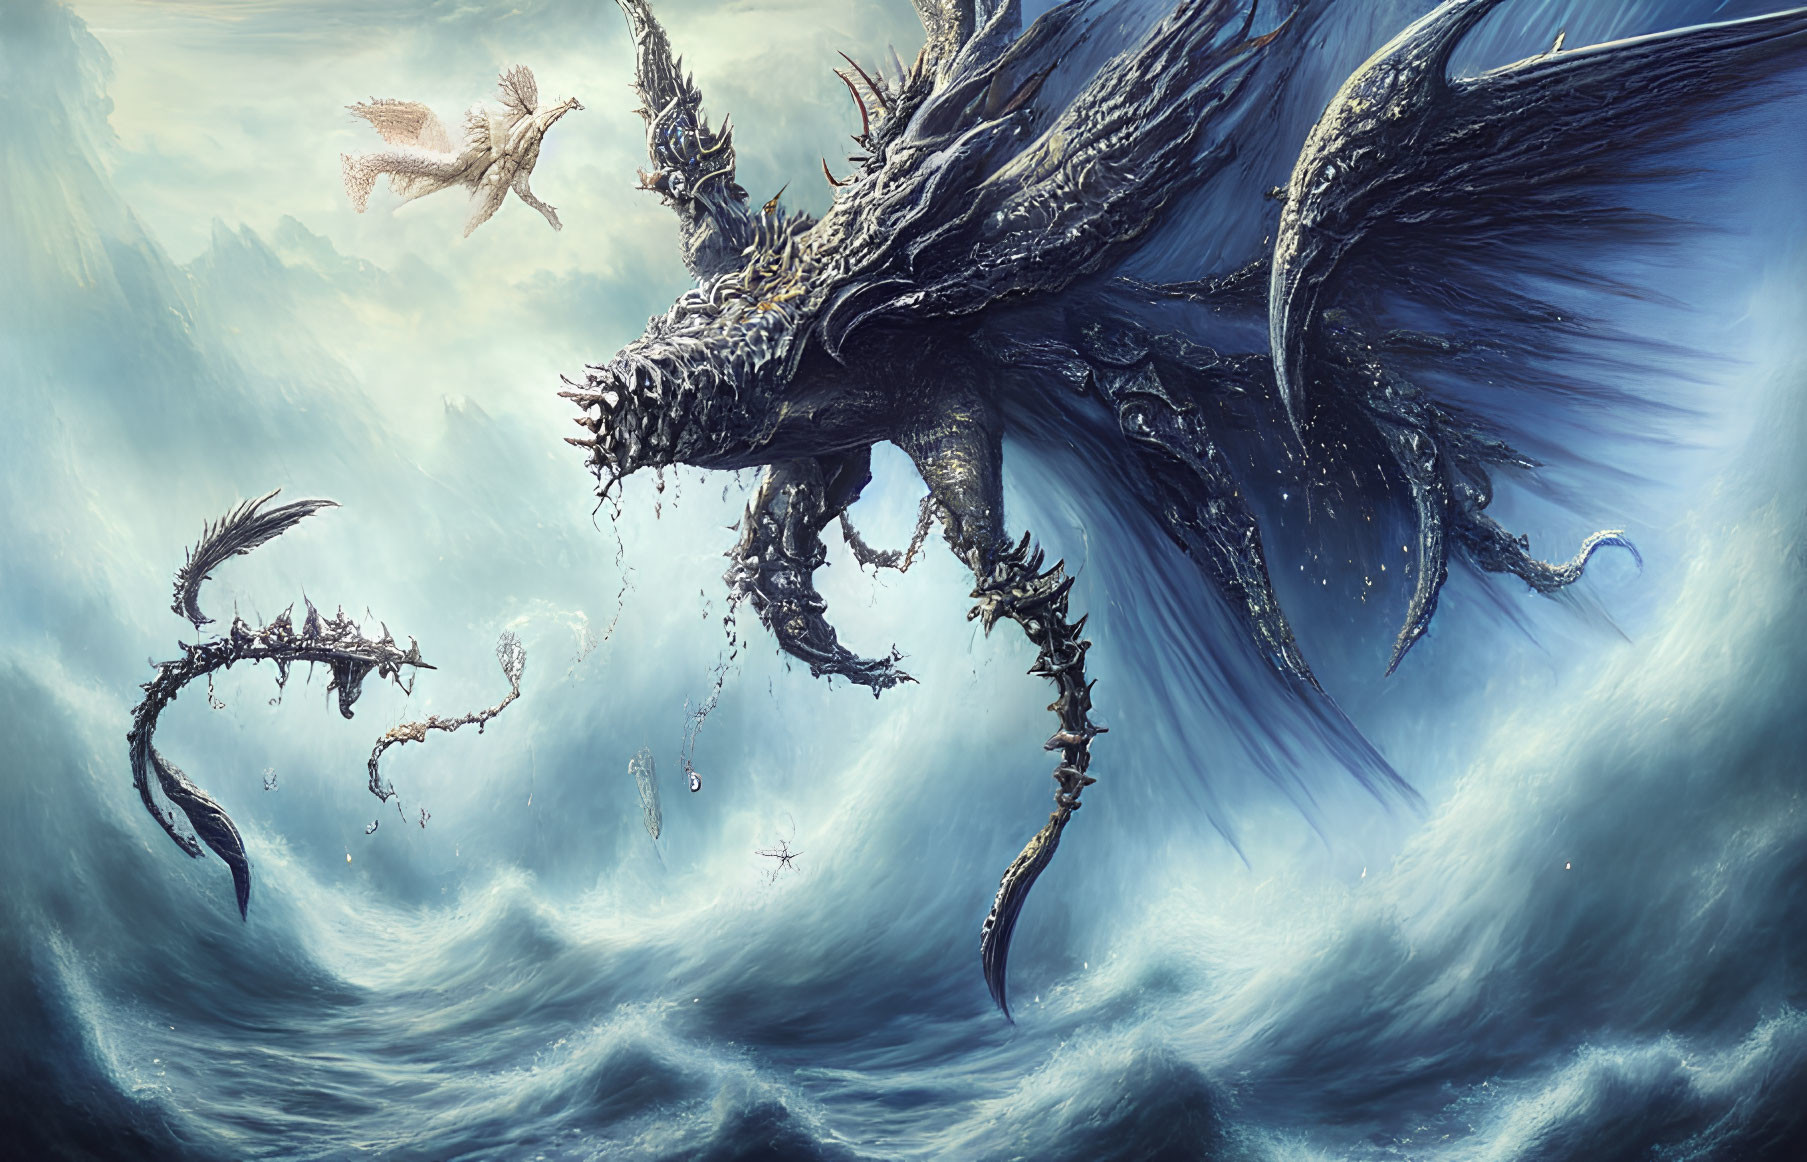 Black dragon with wings confronts creatures in fantasy seascape